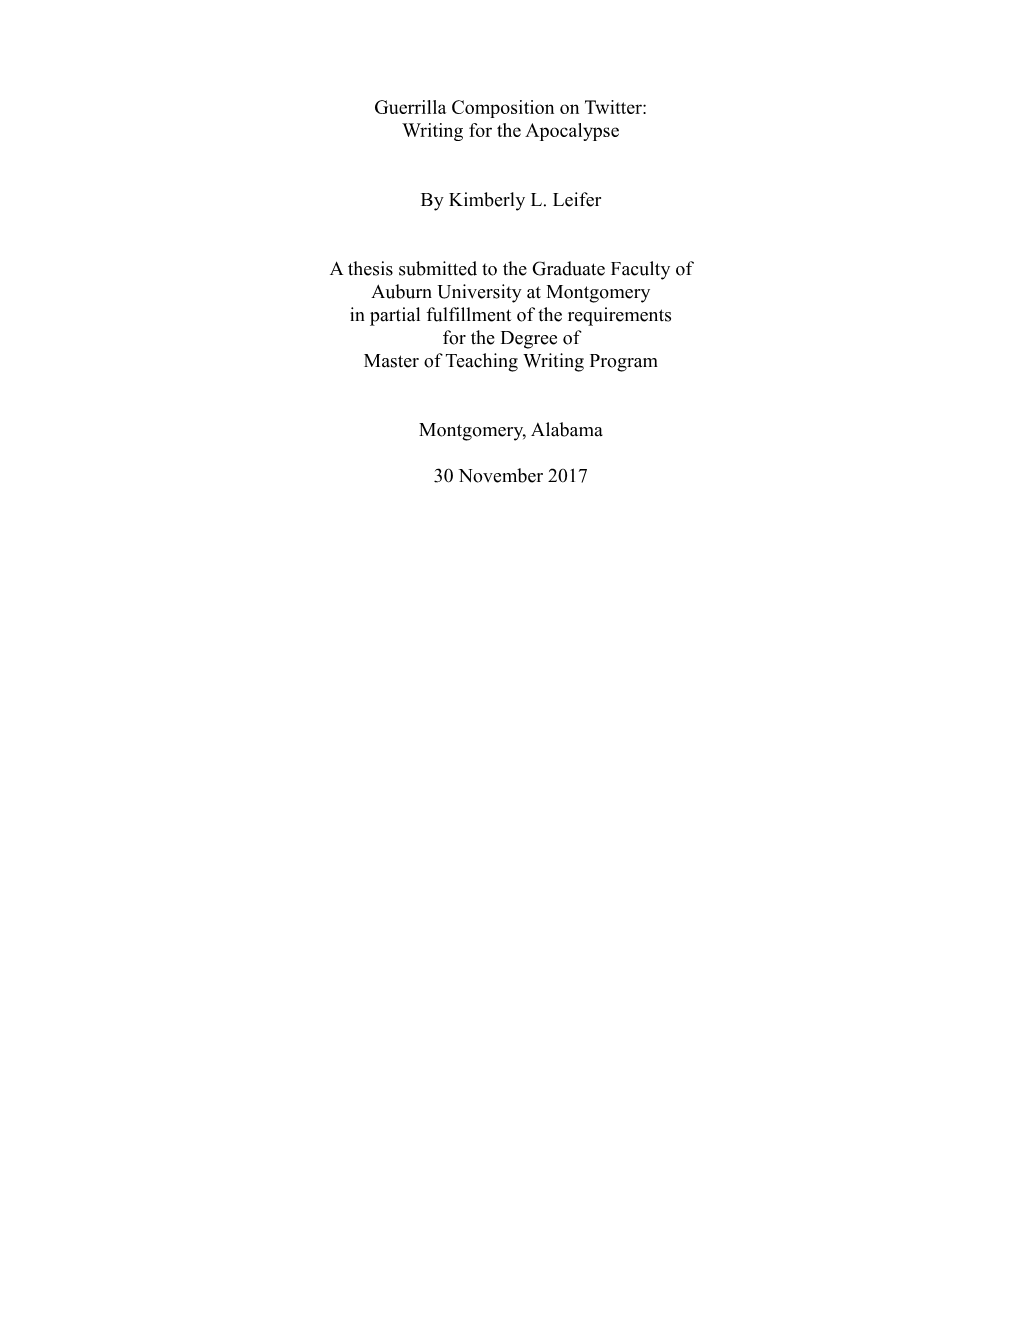 Guerrilla Composition on Twitter: Writing for the Apocalypse by Kimberly L. Leifer a Thesis Submitted to the Graduate Faculty Of